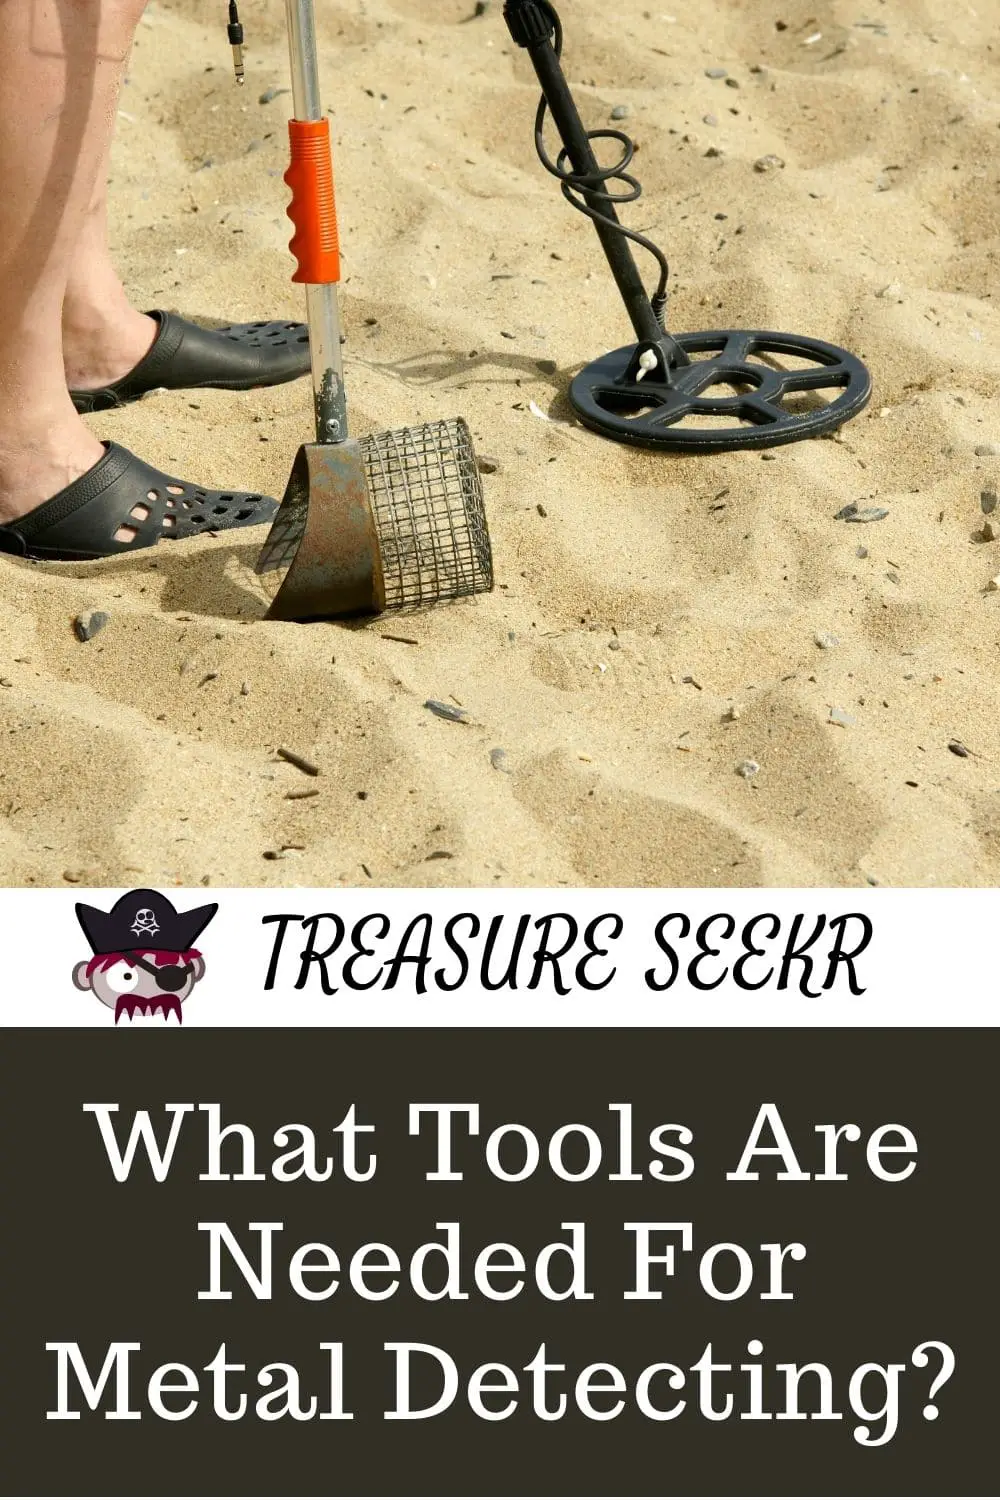 What Tools Are Needed For Metal Detecting